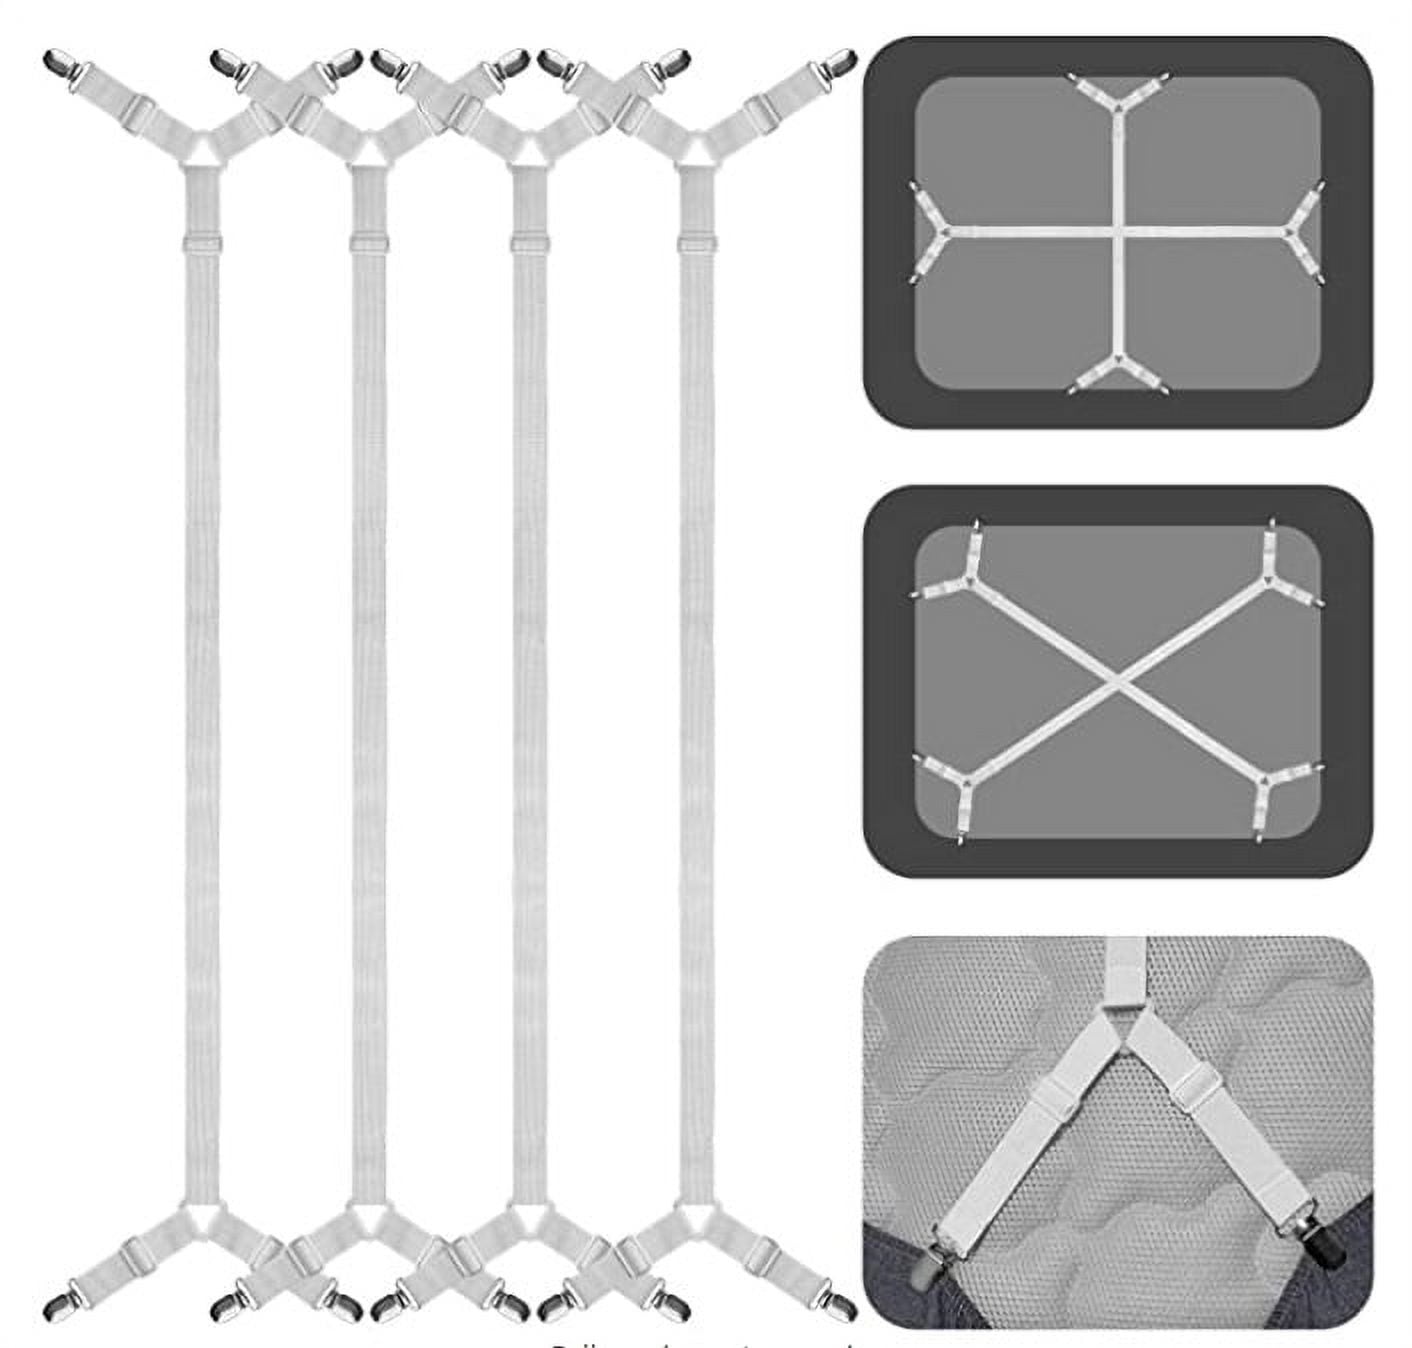 Tuyeabc Bed Sheet Holder Straps, 3 Set/12 Ways, Adjustable Crisscross Bed  Sheet Clips, Elastic Bands Suspenders Keeping Fitted Bedsheet in Place for